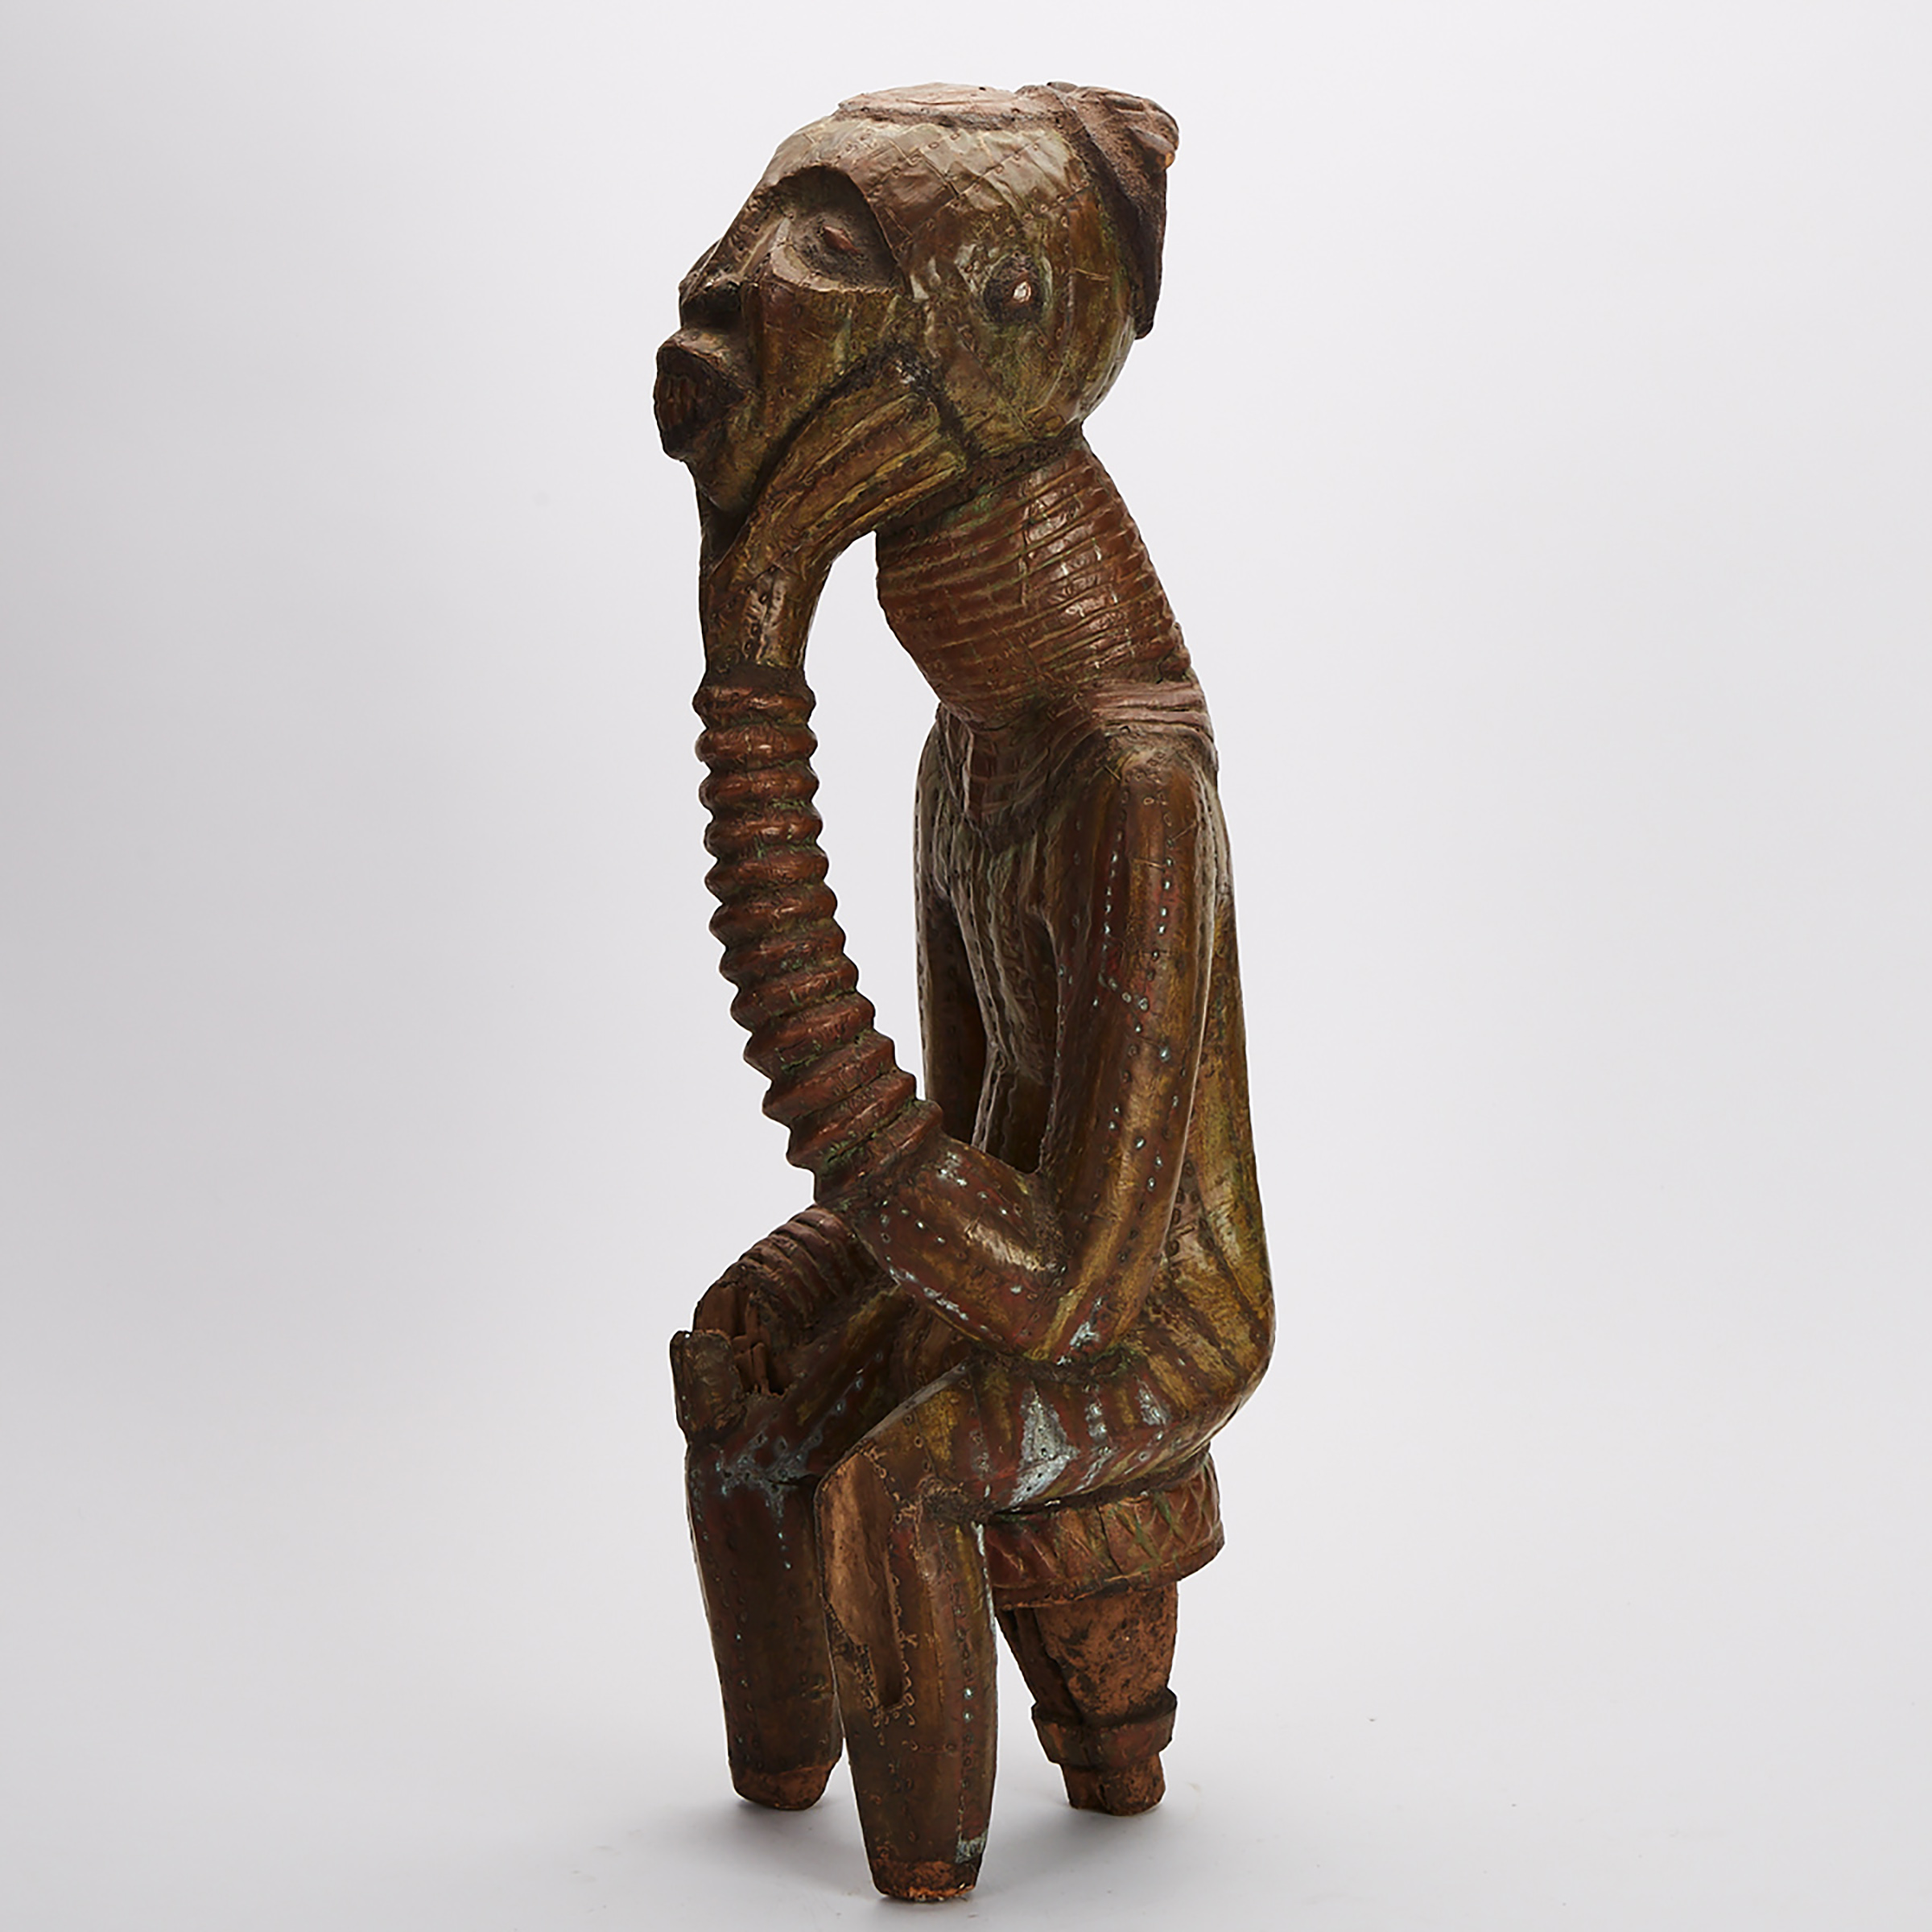 Bangwa Ancestral Seated Figure, Cameroon, Central Africa